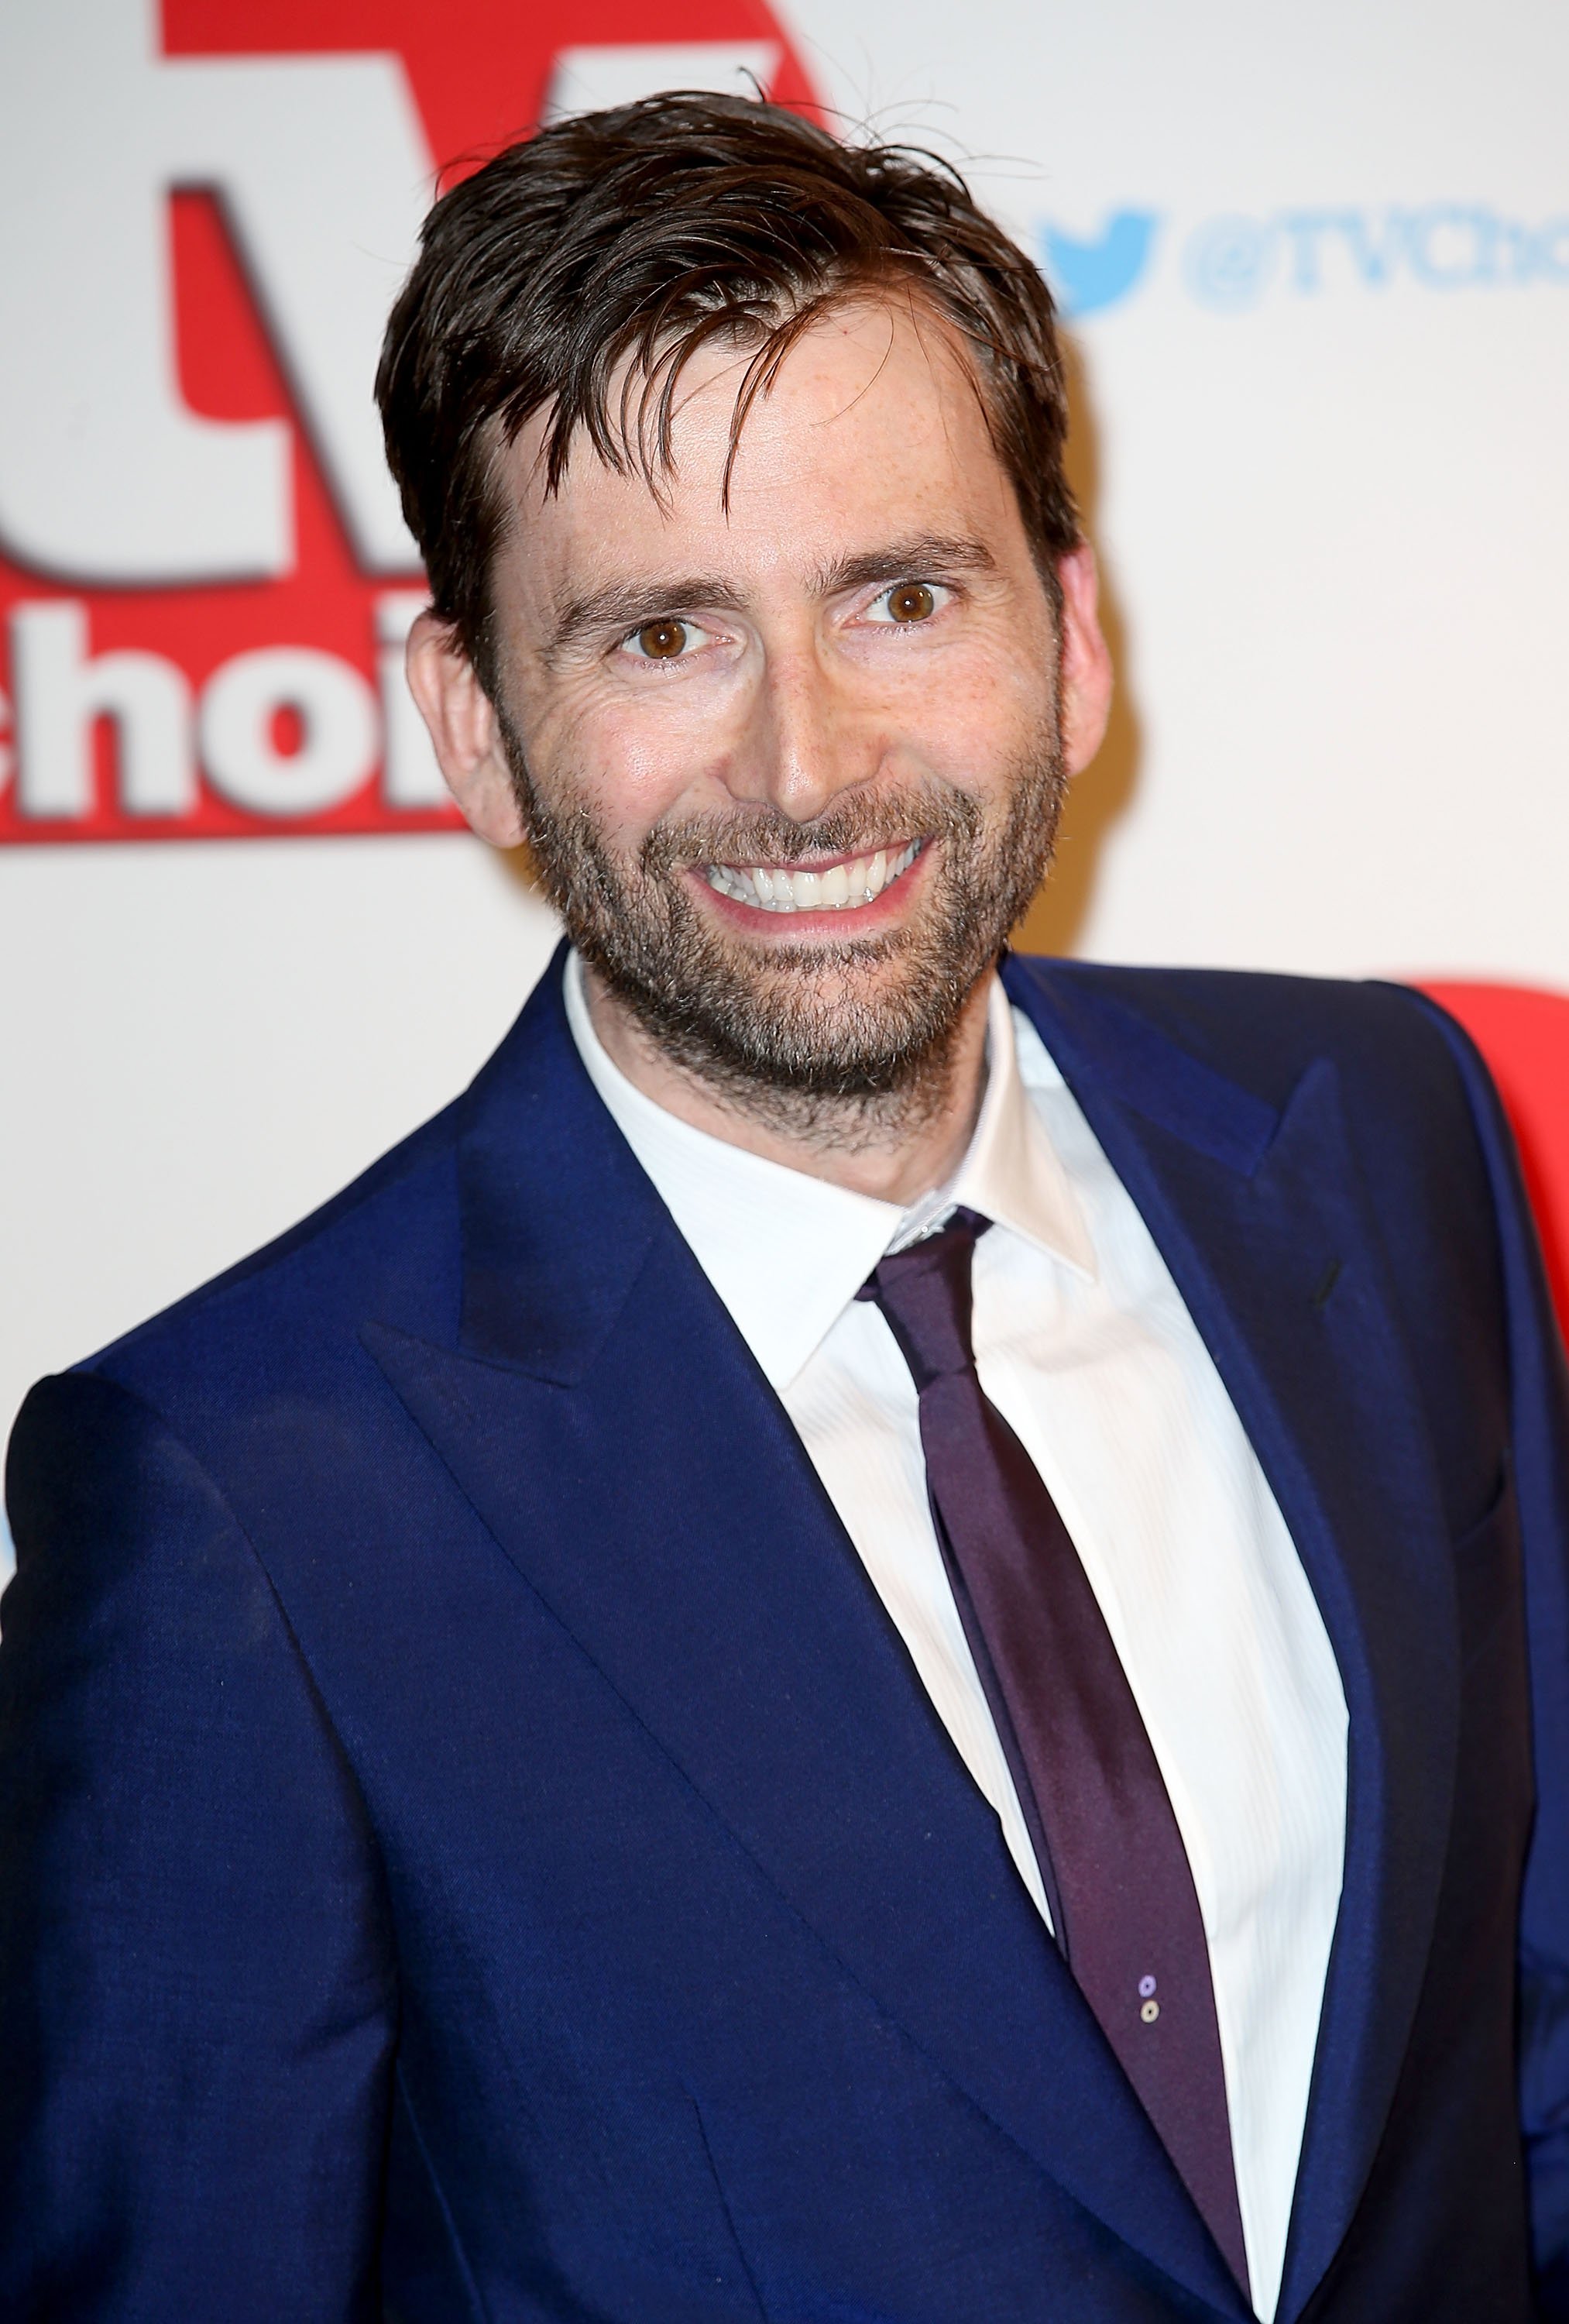 David Tennant attends the TV Choice Awards 2015 at Hilton Park Lane on September 7, 2015 in London